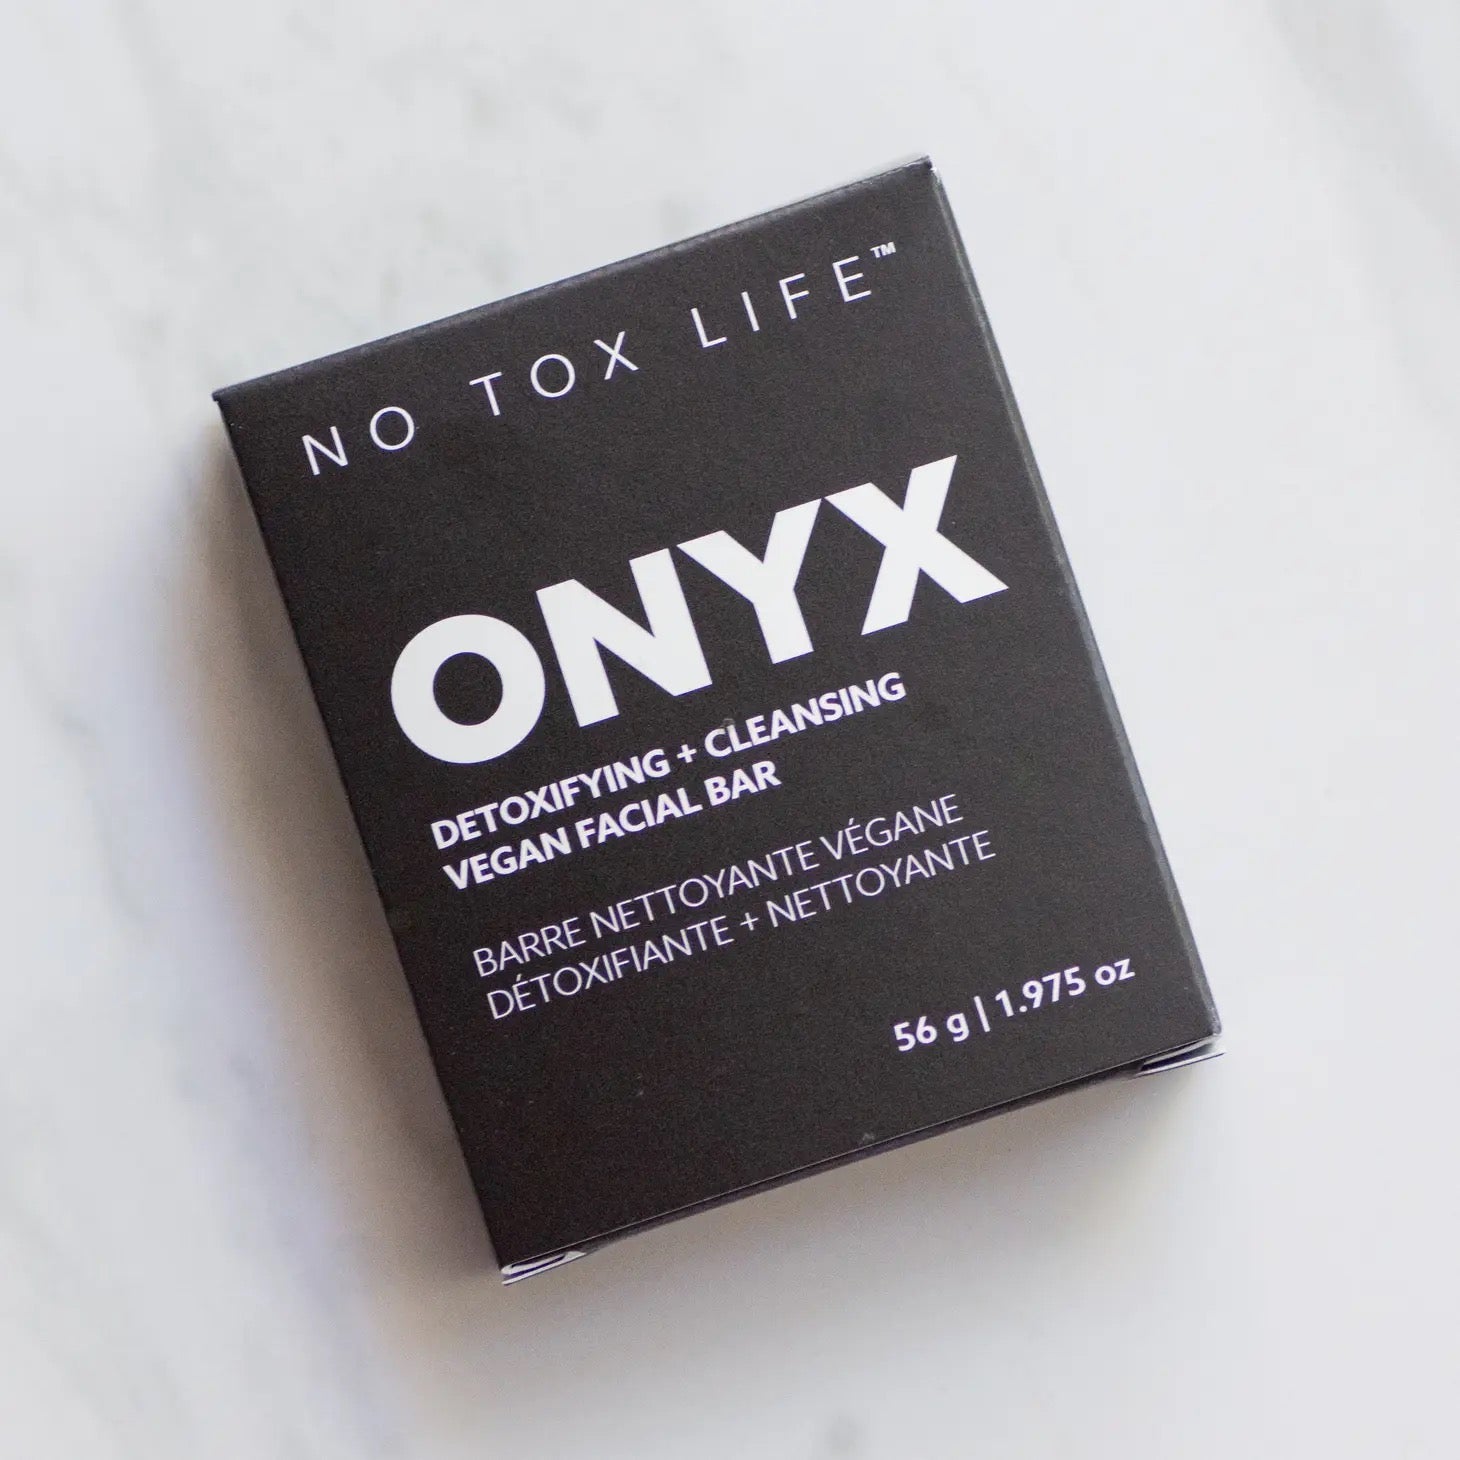 ONYX Facial Cleaning Bar